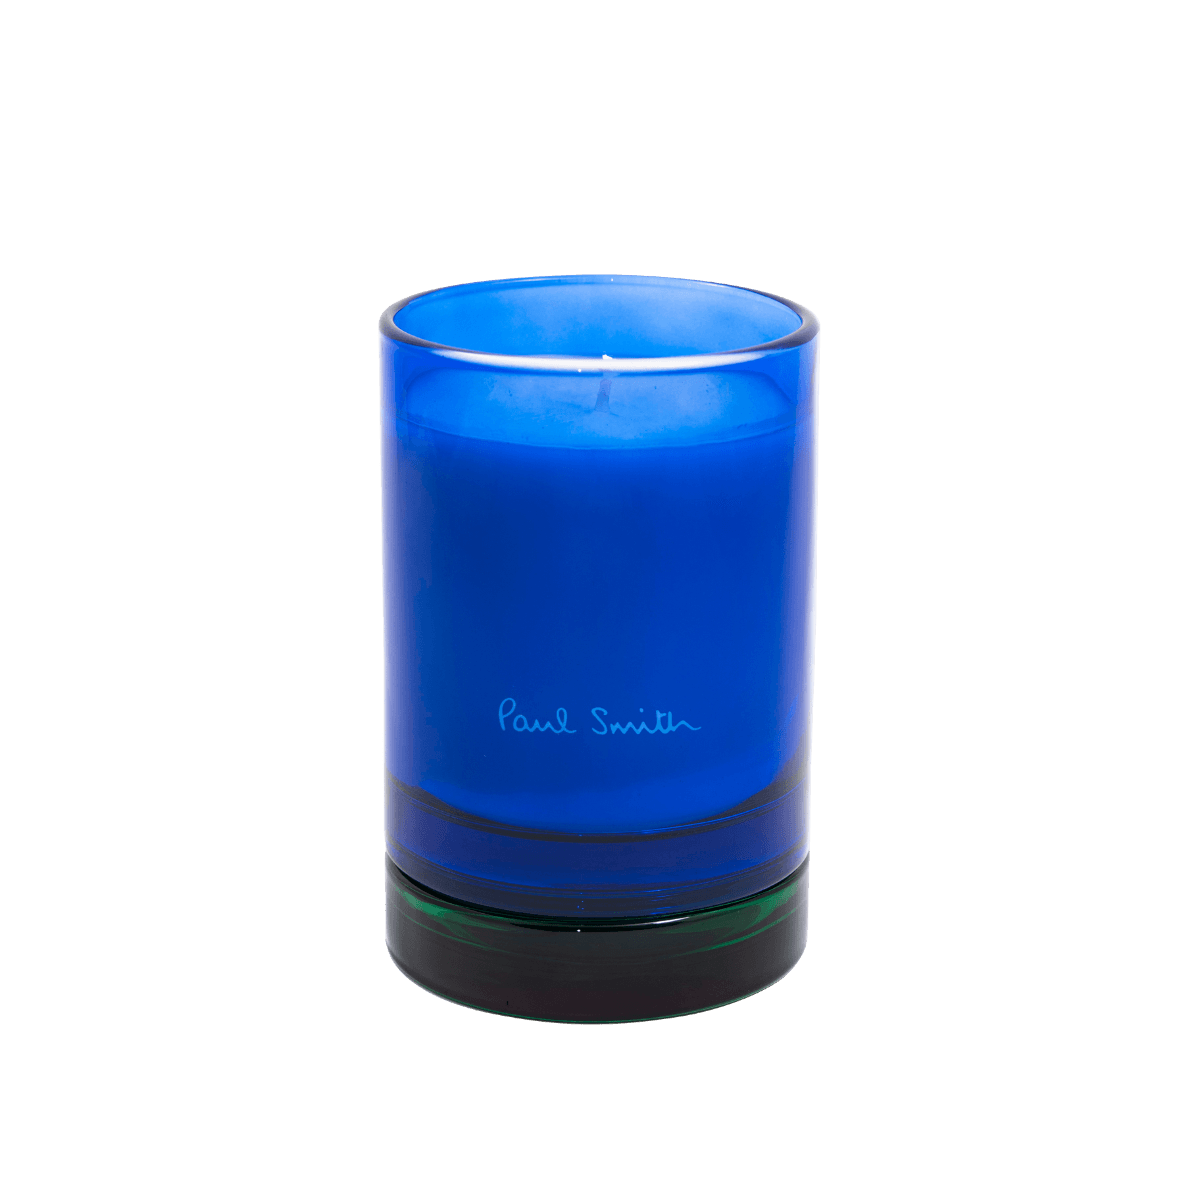 Image of Early bird scented candle by Paul Smith